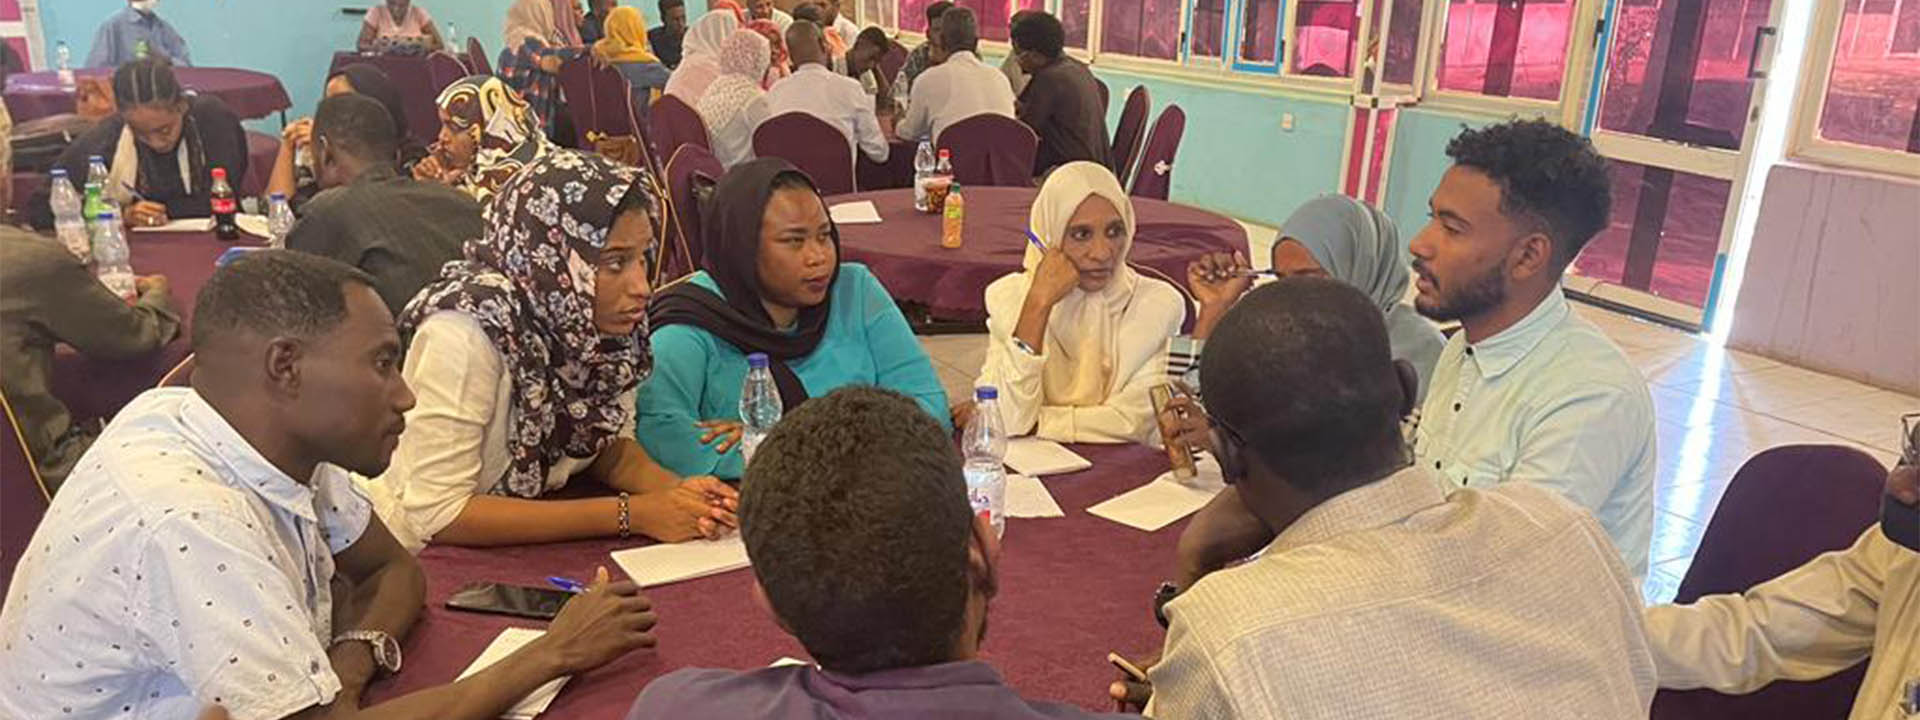 Inter-Generational Dialogue, Post-Revolution Towards Inclusive Peace Processes for Youth In Sudan As Per UNSCR 2250 And UNSCR 2419